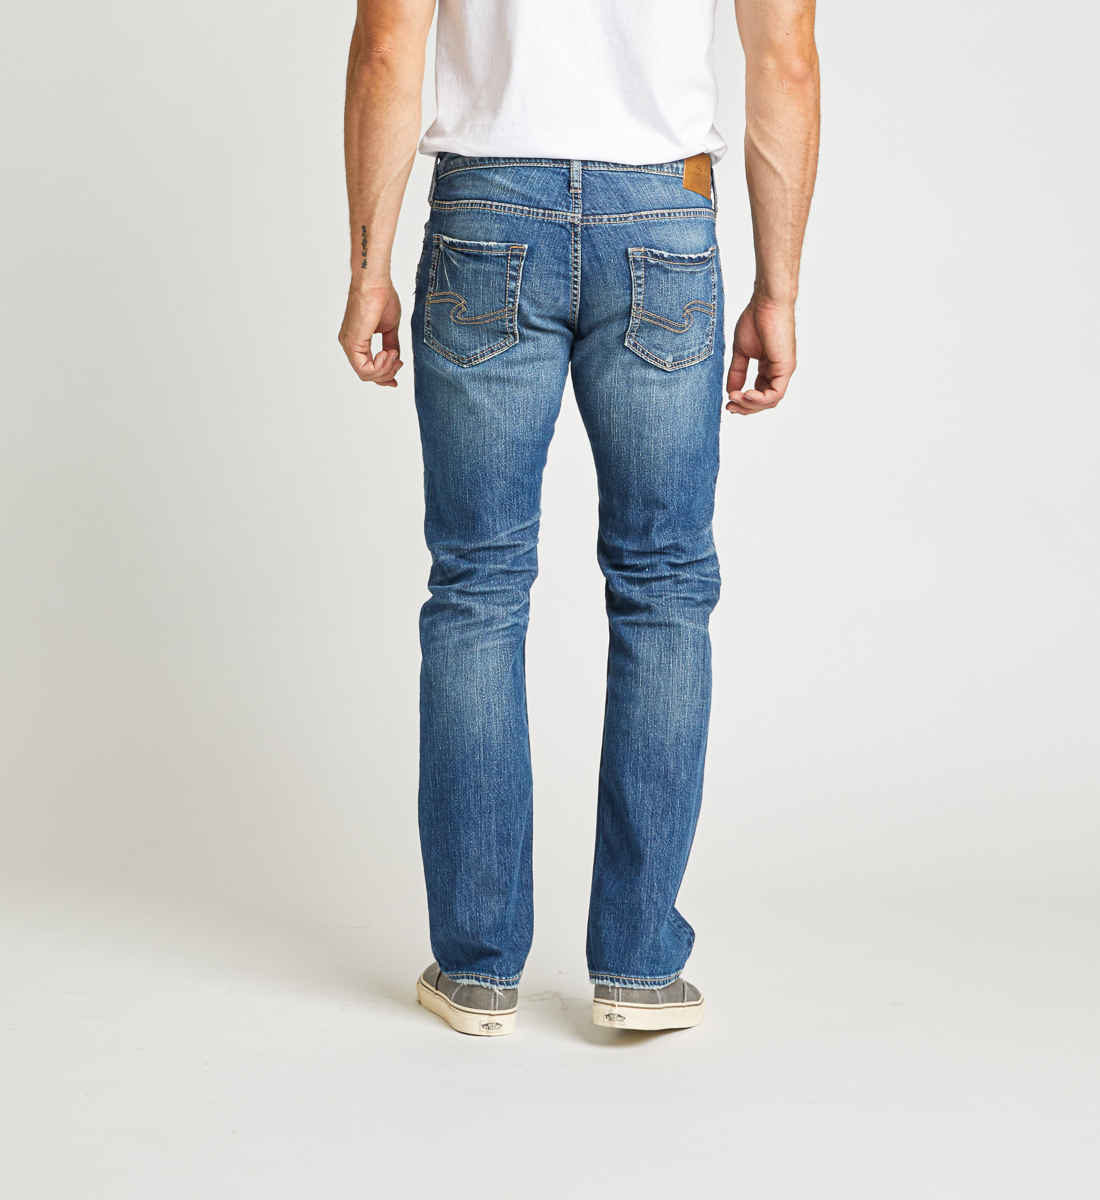 Allan Classic Fit Straight Leg Jeans - Silver Jeans US